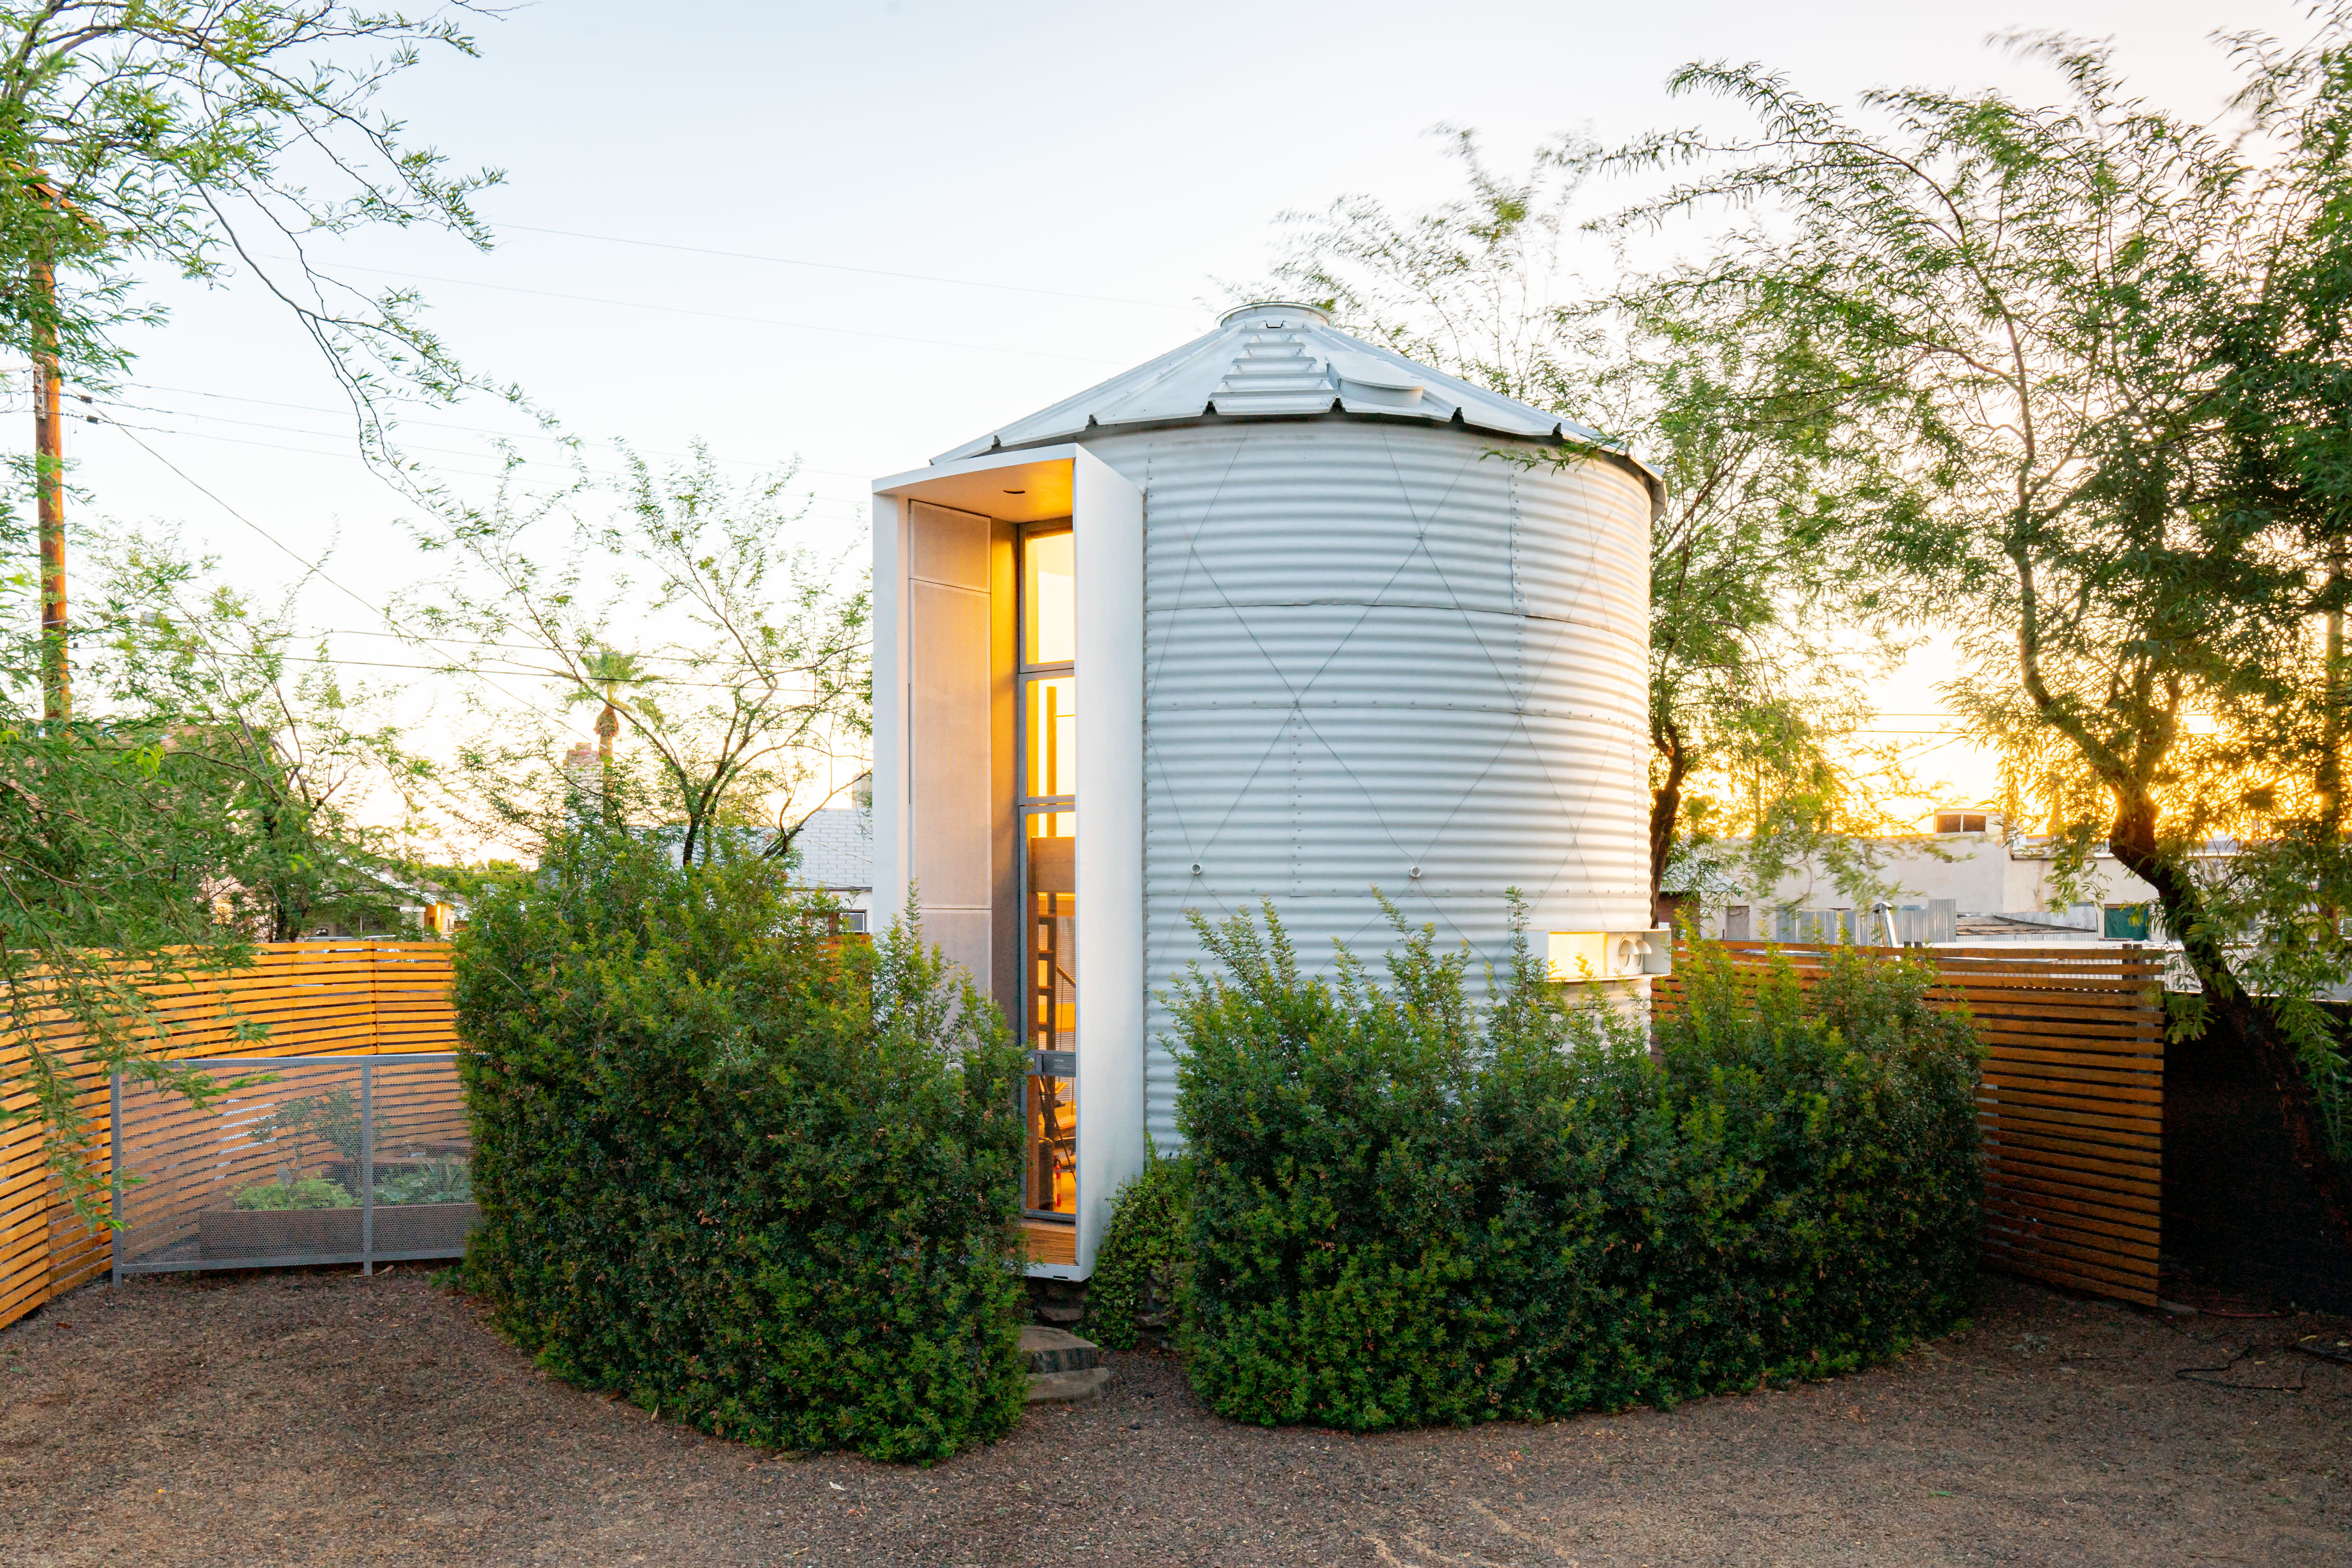 What It's Like to Live in a Silo House